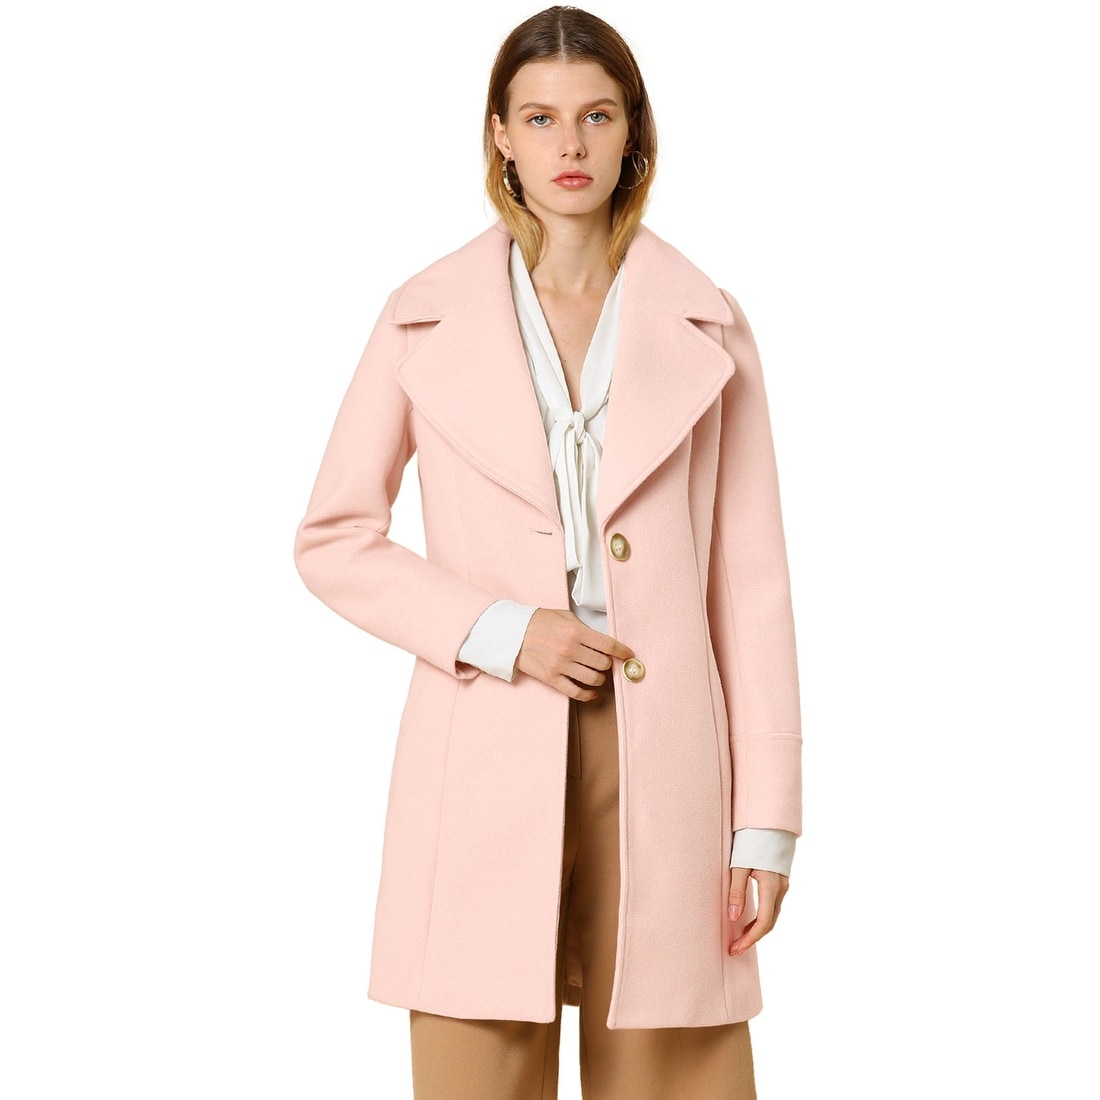 Pervobs Womens Winter Casual Coat Plain Single-Breasted Lapel Trench Coat Soft Warm Outwear Jacket Overcoat